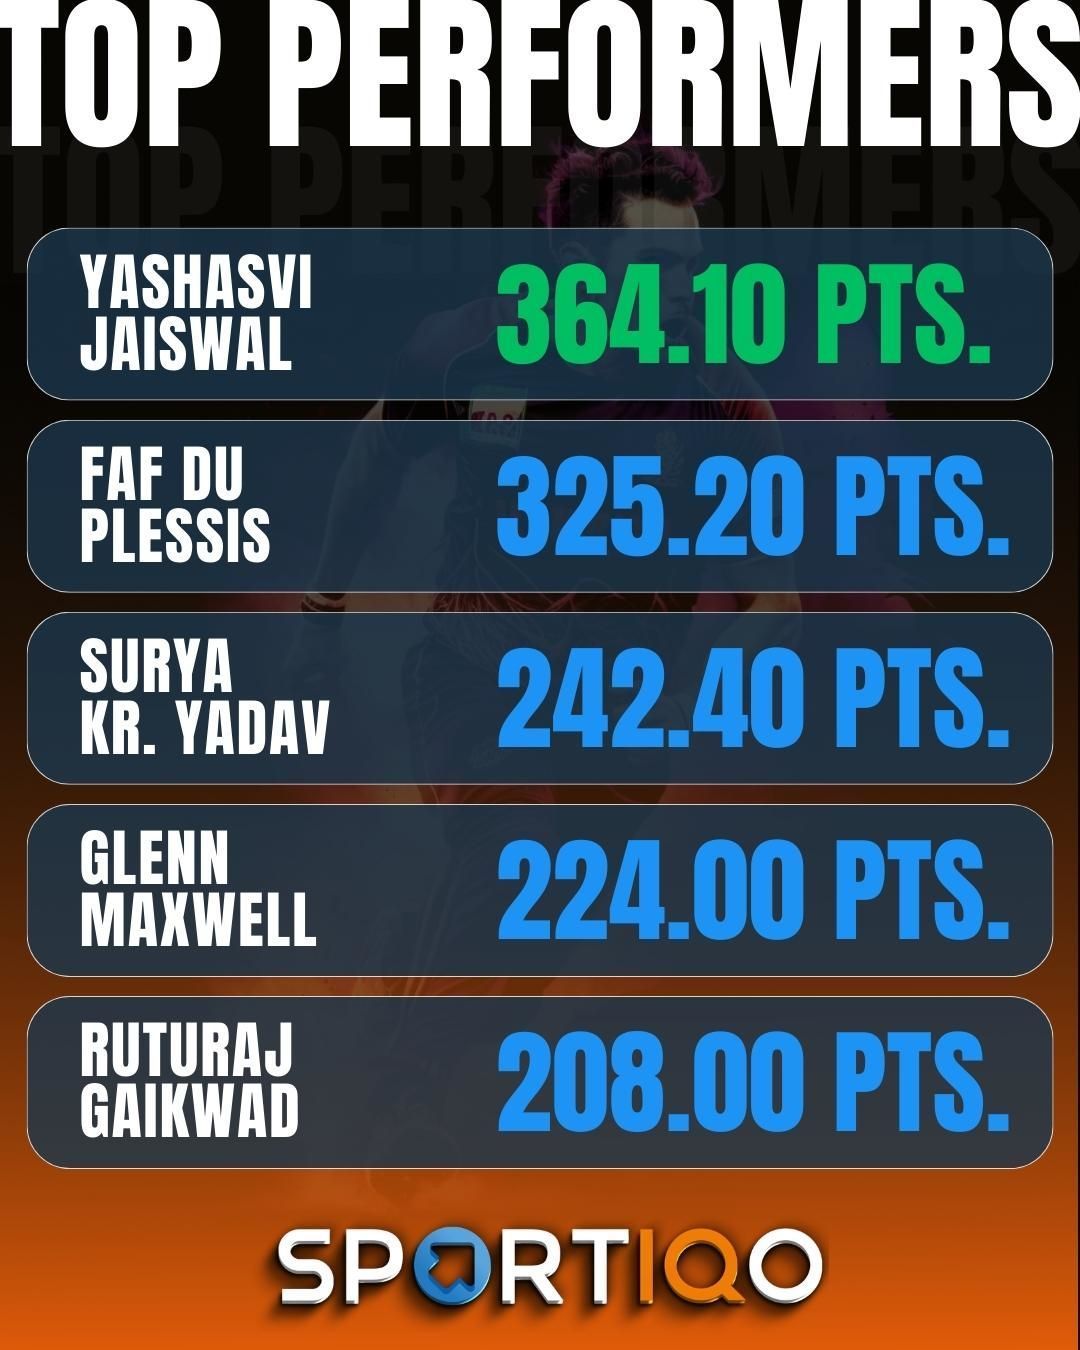 Suryakumar Yadav&#039;s incredible performances see him make it to the top gainers&#039; list for the past week,